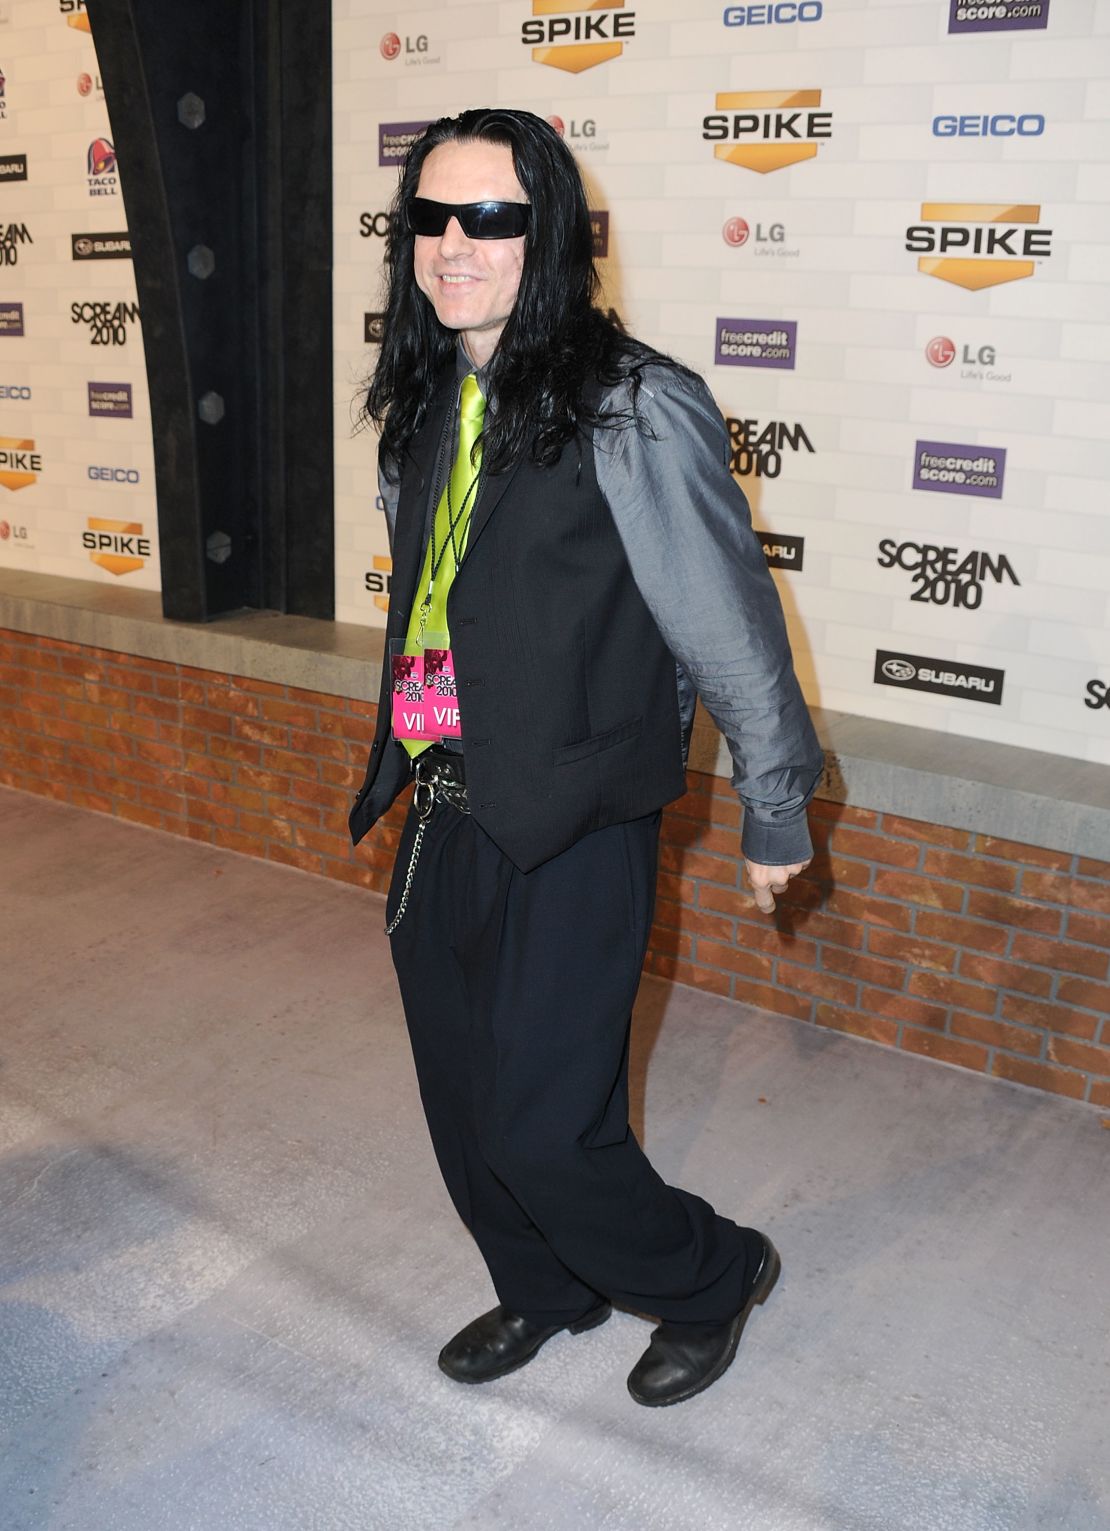 Tommy Wiseau's film "The Room" has been called "the 'Citizen Kane' of bad movies."